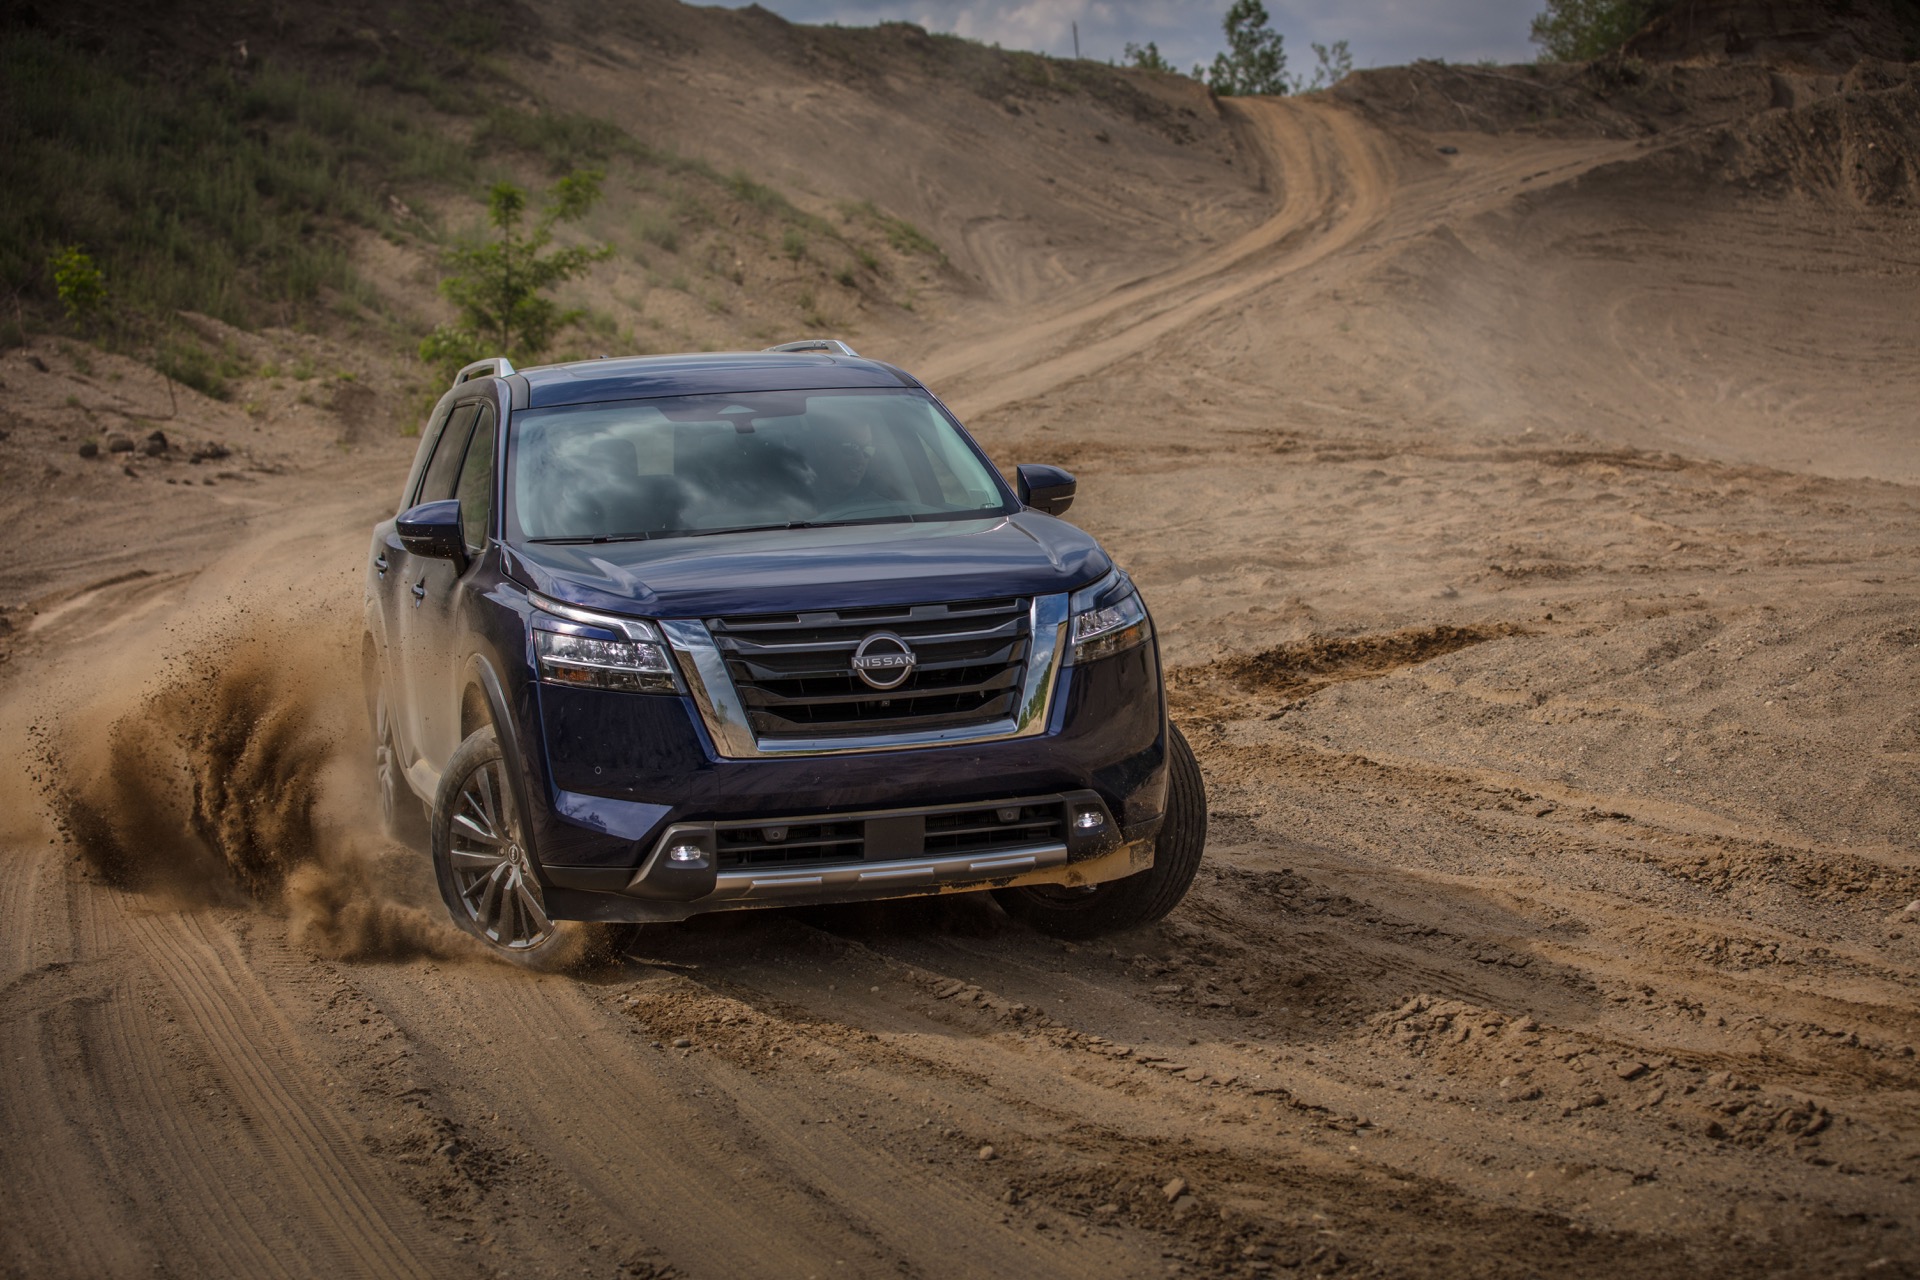 2022 Nissan Pathfinder: Trendy Off-Road Looks, Still Built For The ...